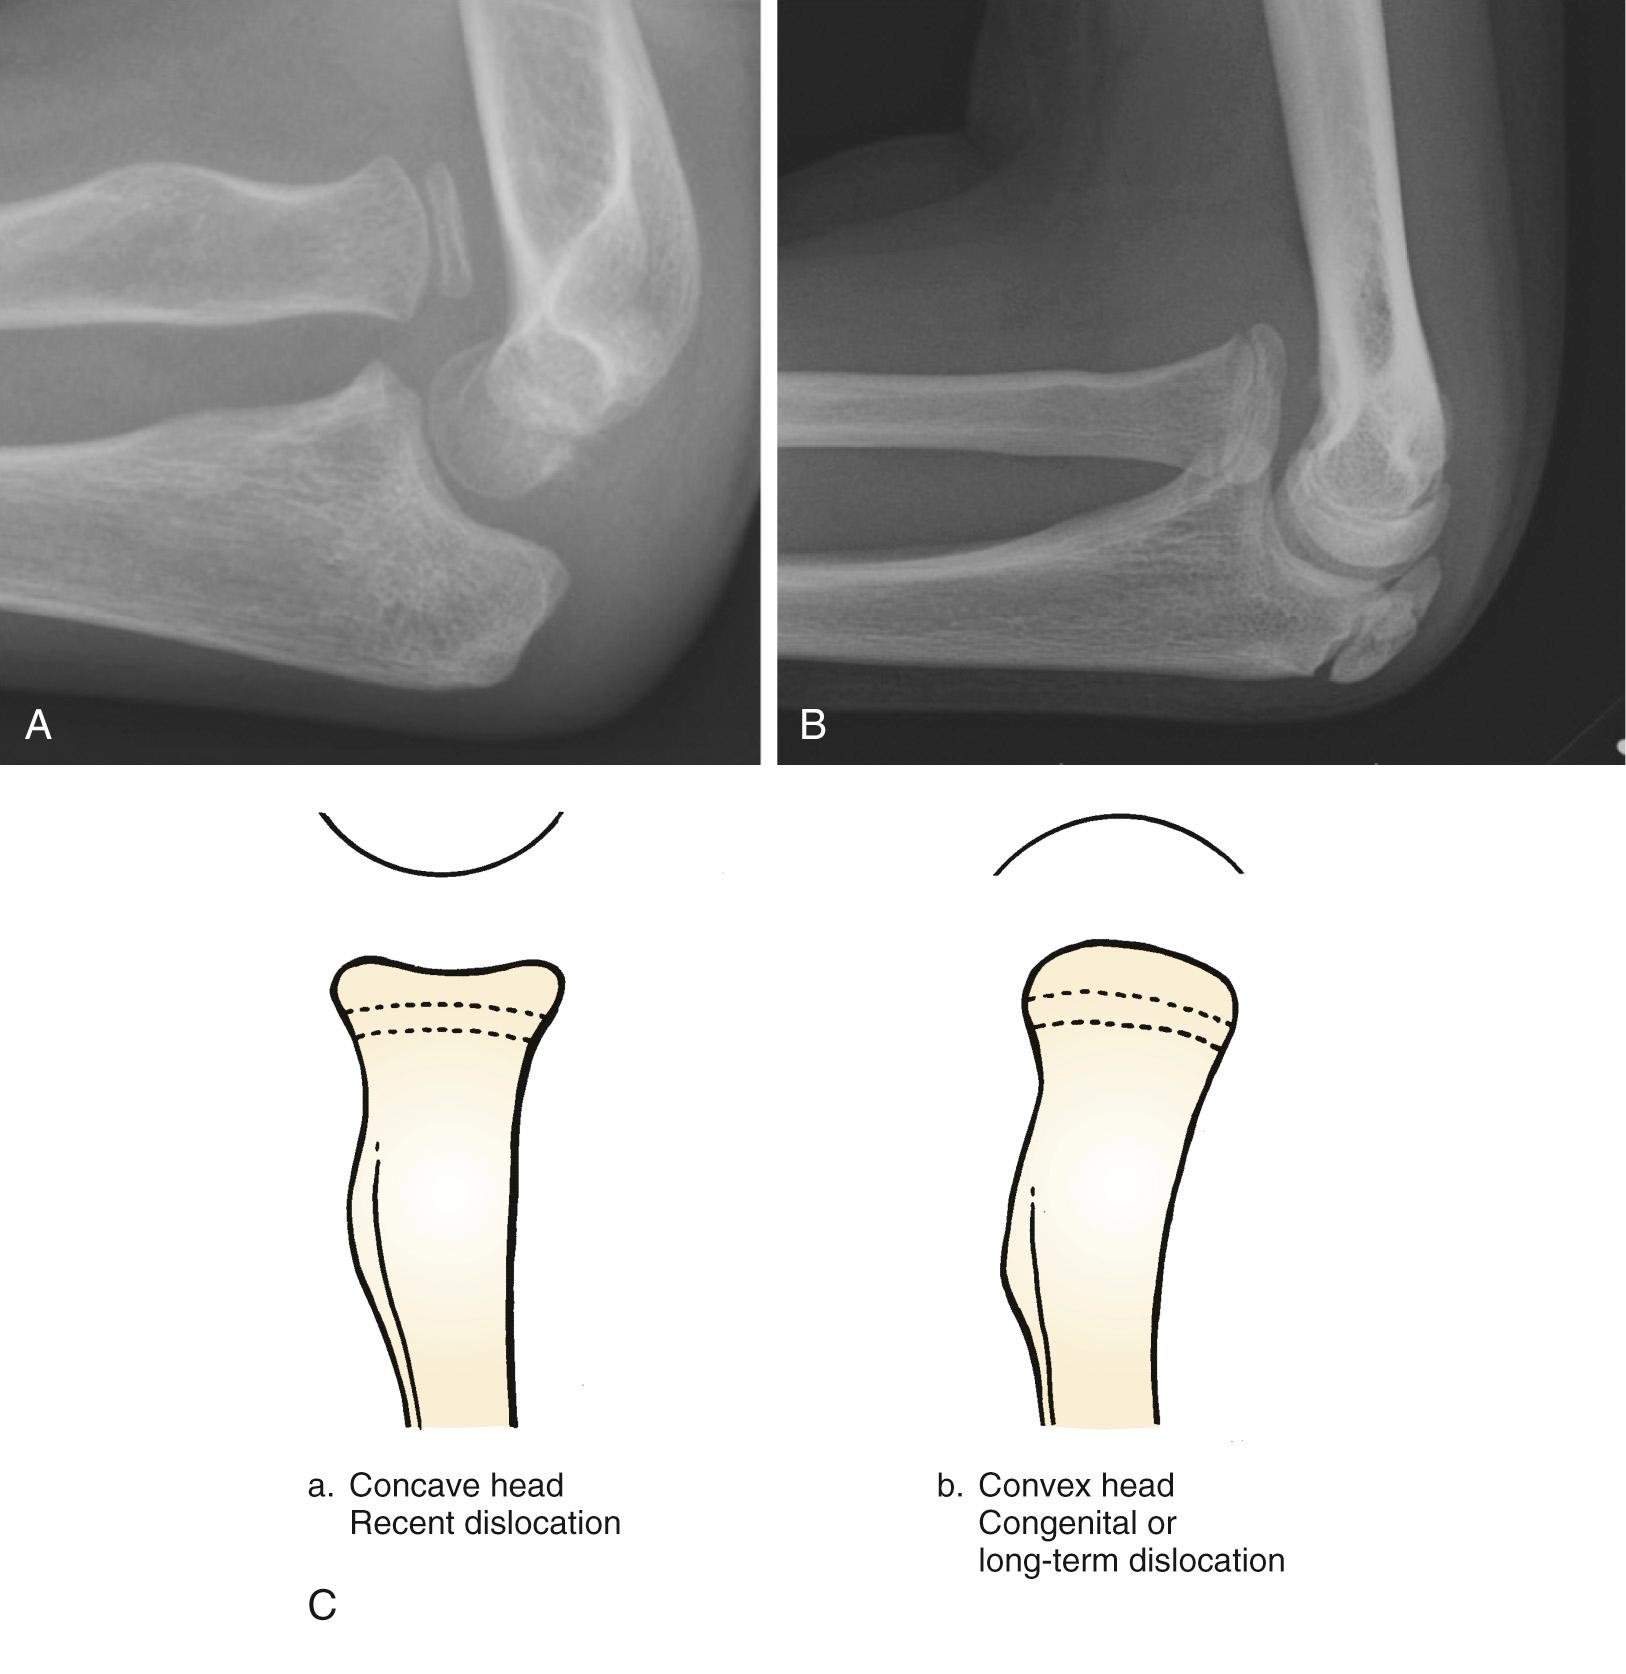 FIG 32.4, (A) Recent radiocapitellar dislocation with concave radial head. (B) Developmental radiocapitellar dislocation with convex radial head. (C) Schematic diagram of this finding.